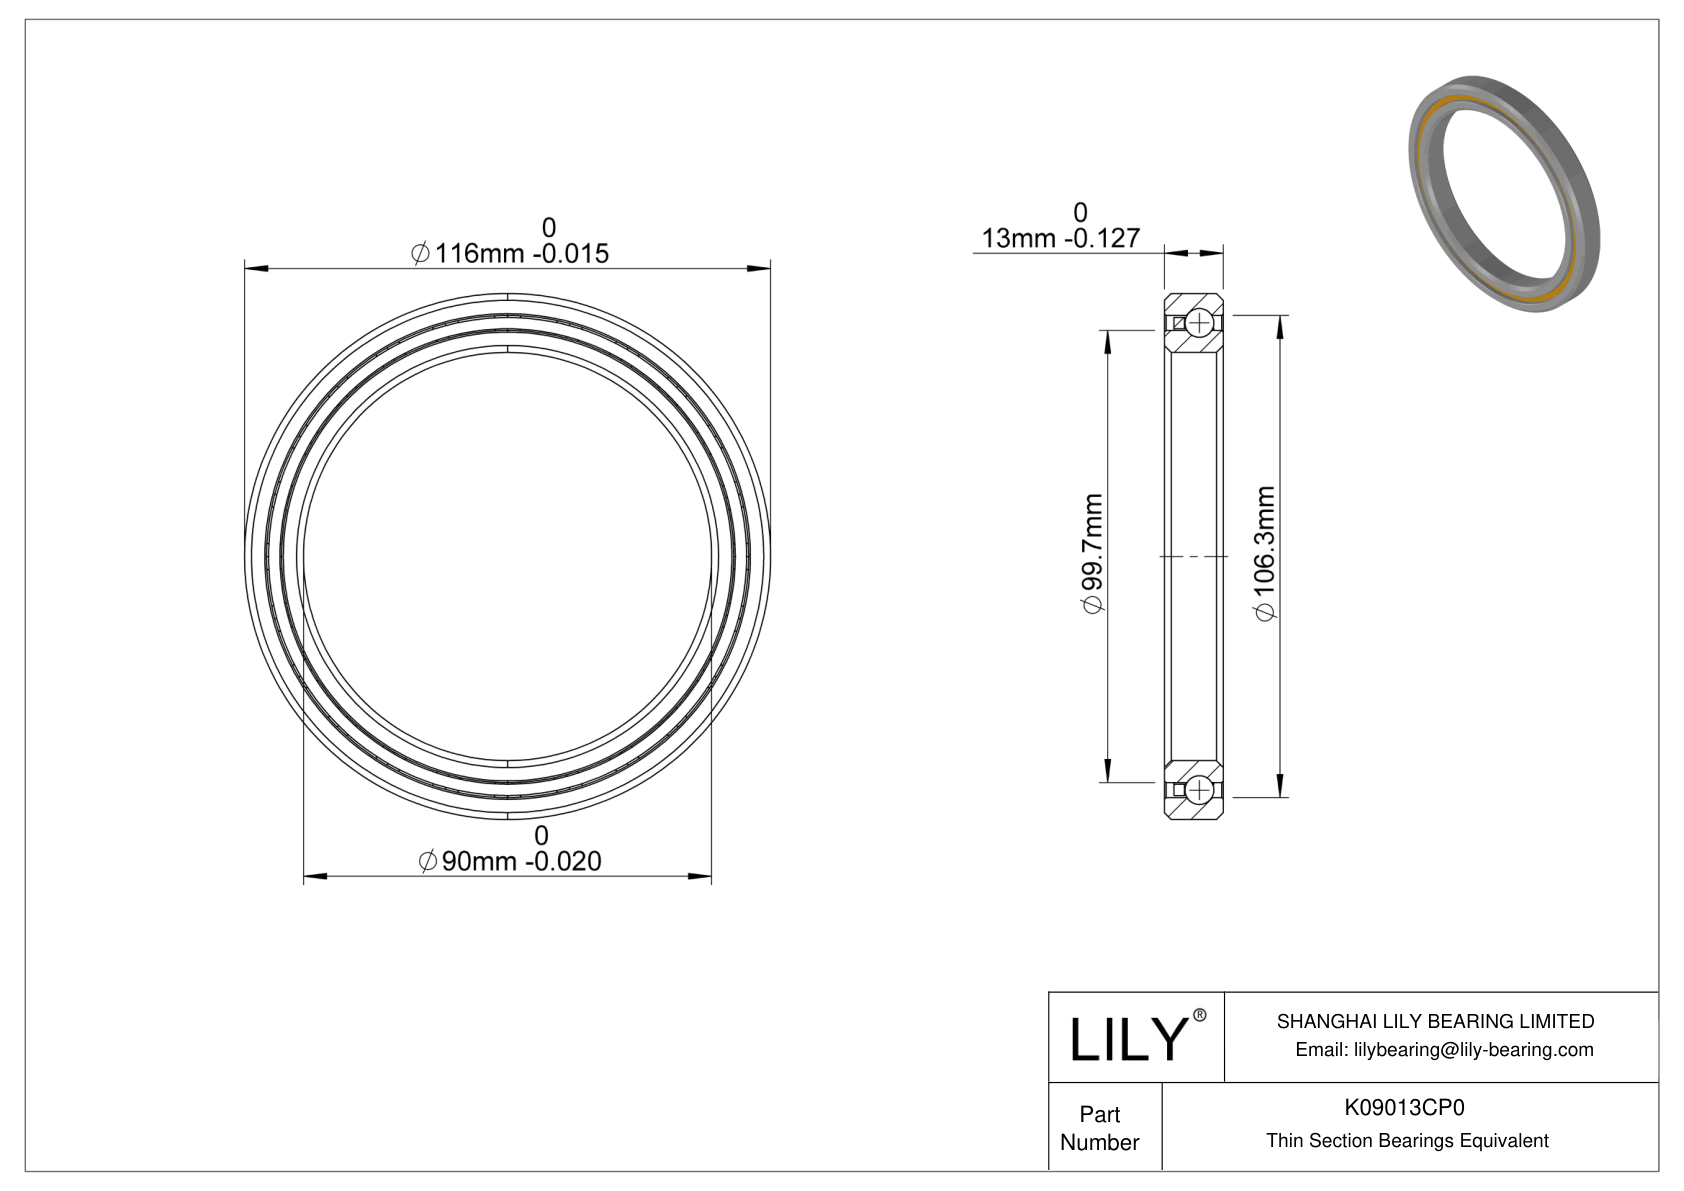 K09013CP0 Constant Section (CS) Bearings cad drawing